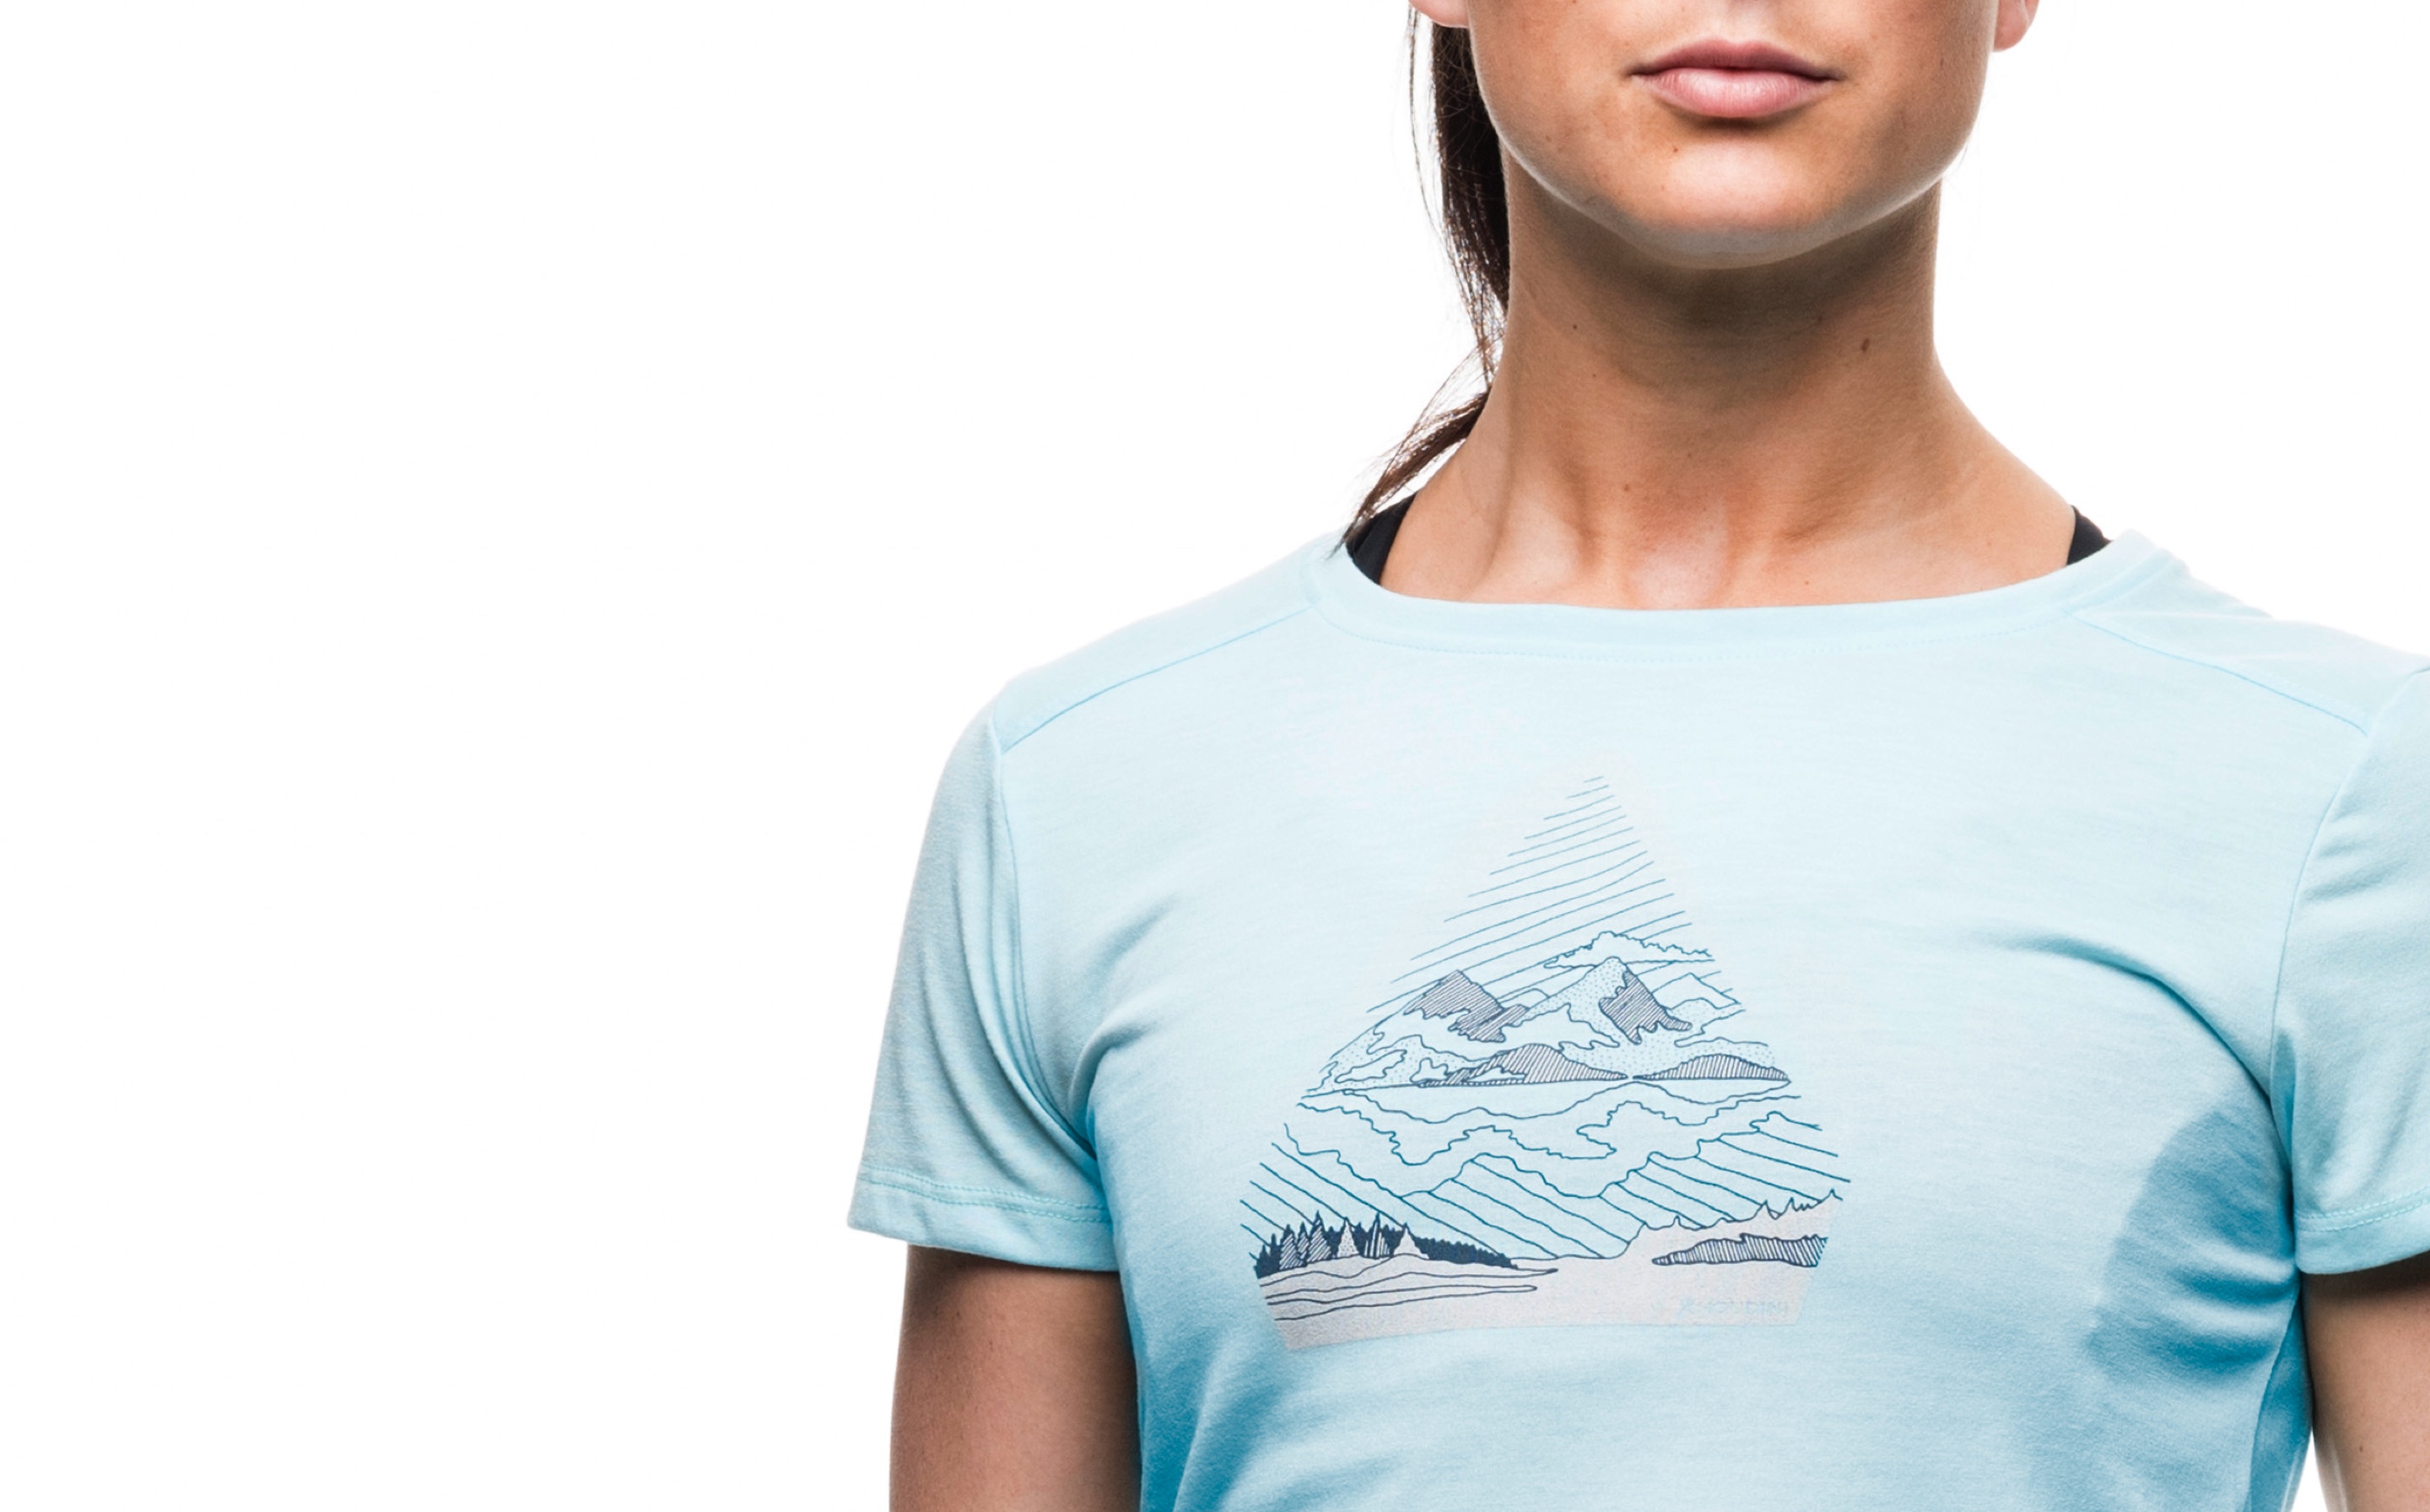 Graphical expressions for Houdini Sportswear. Example From the collection. Tee shirt with print showing nature and mountains.